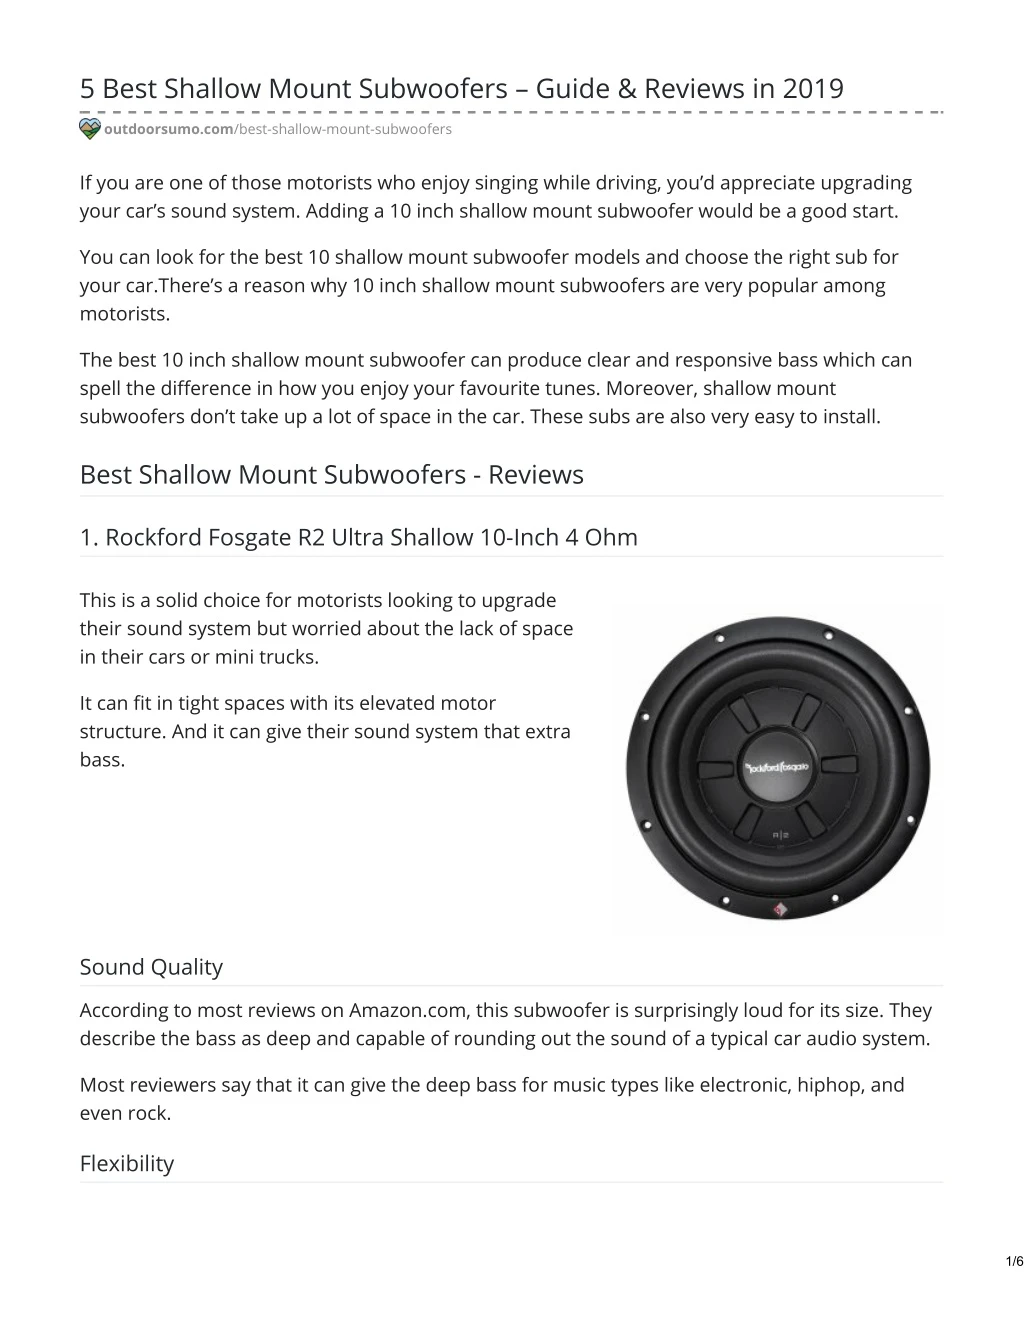 5 best shallow mount subwoofers guide reviews